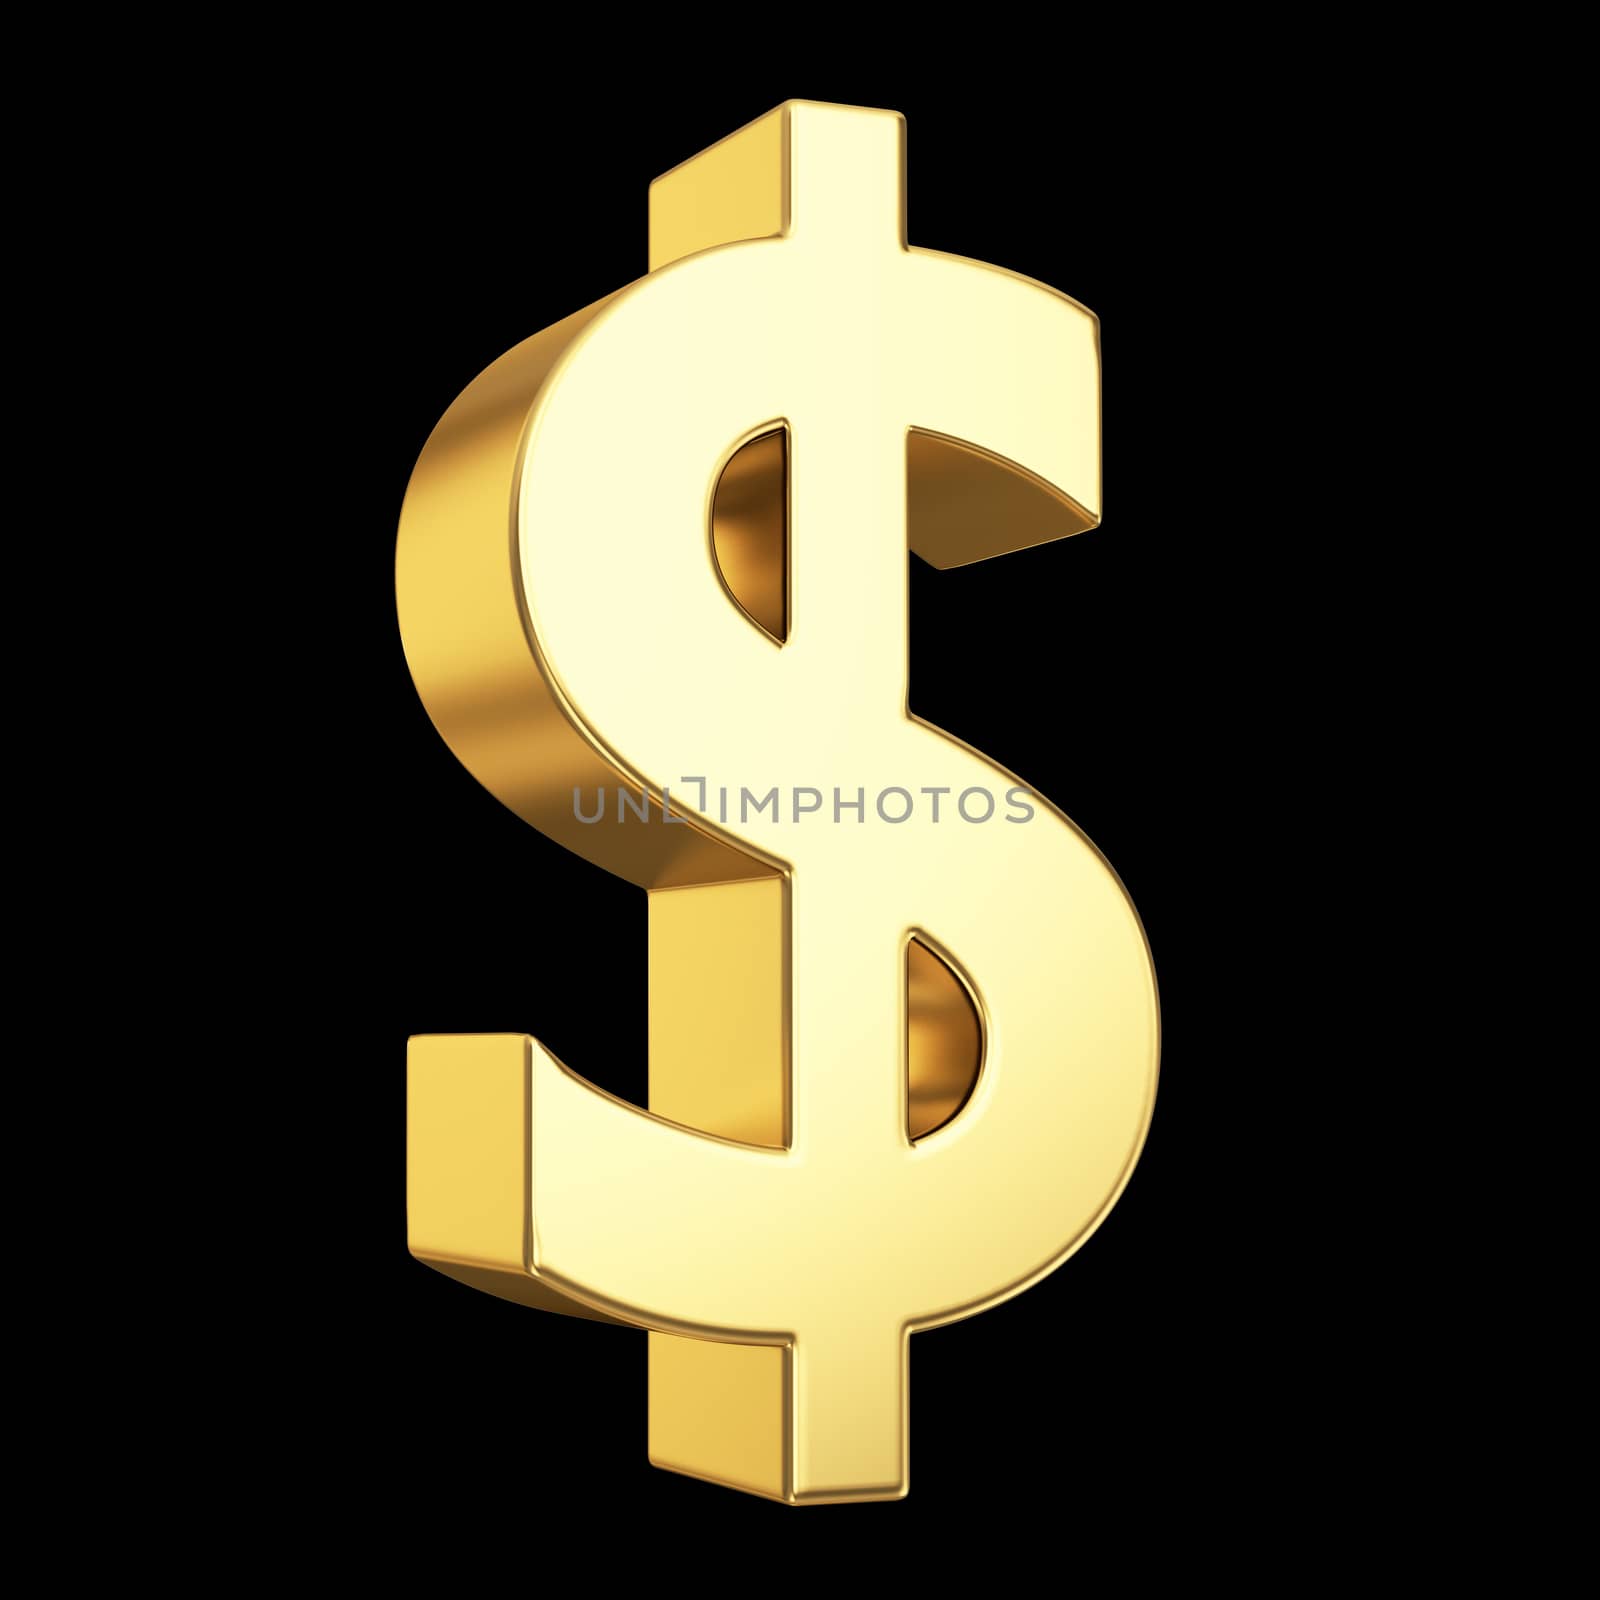 Golden dollar currency symbol - clipping path by 123dartist